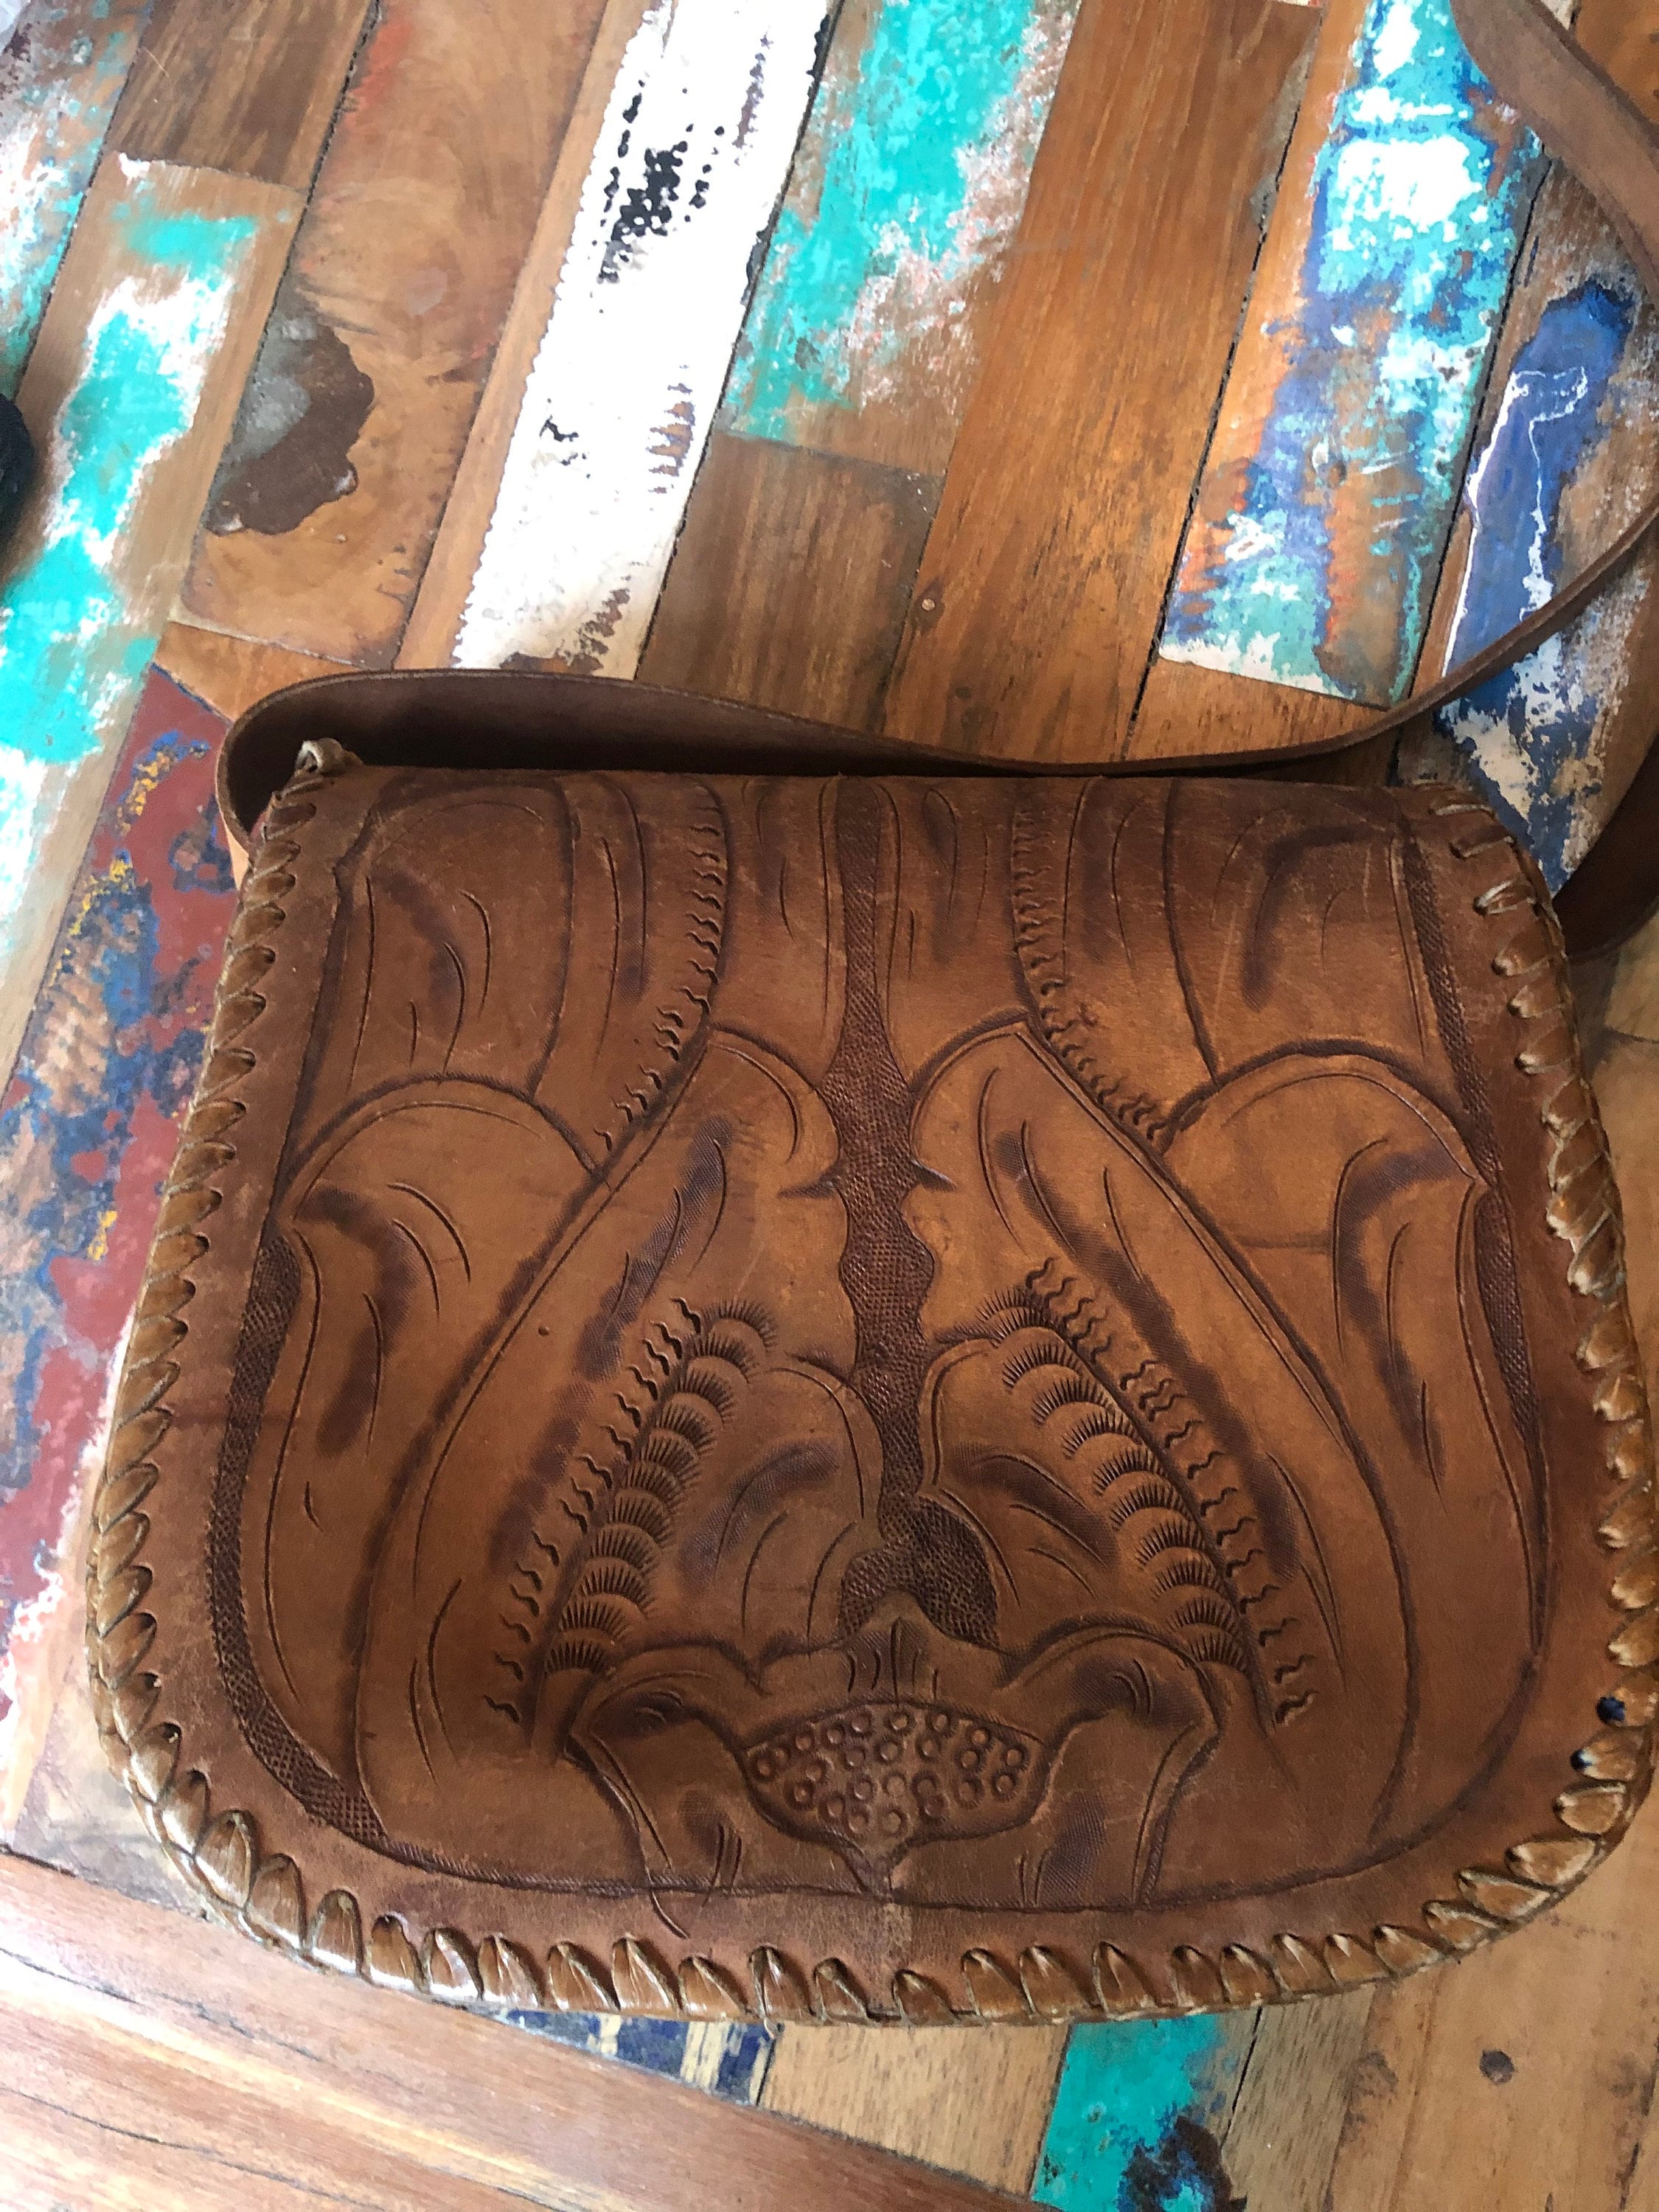 COWBOY LEATHER BAG 70s Western Purse Tooled Leather Cowgirl - Etsy UK